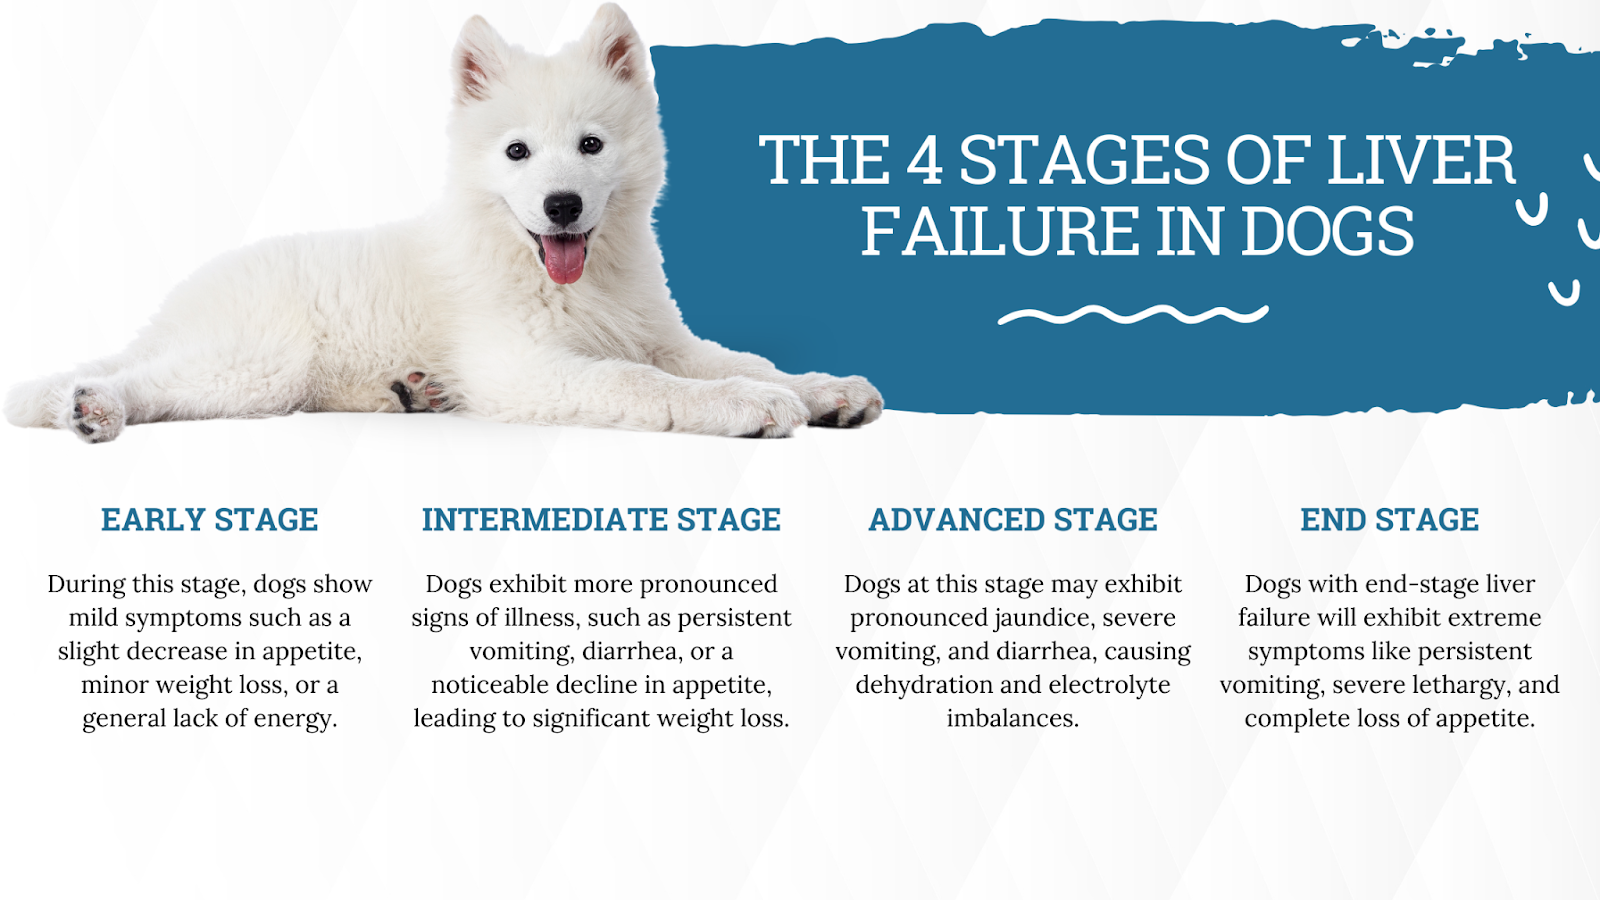 Stages of liver failure in dogs